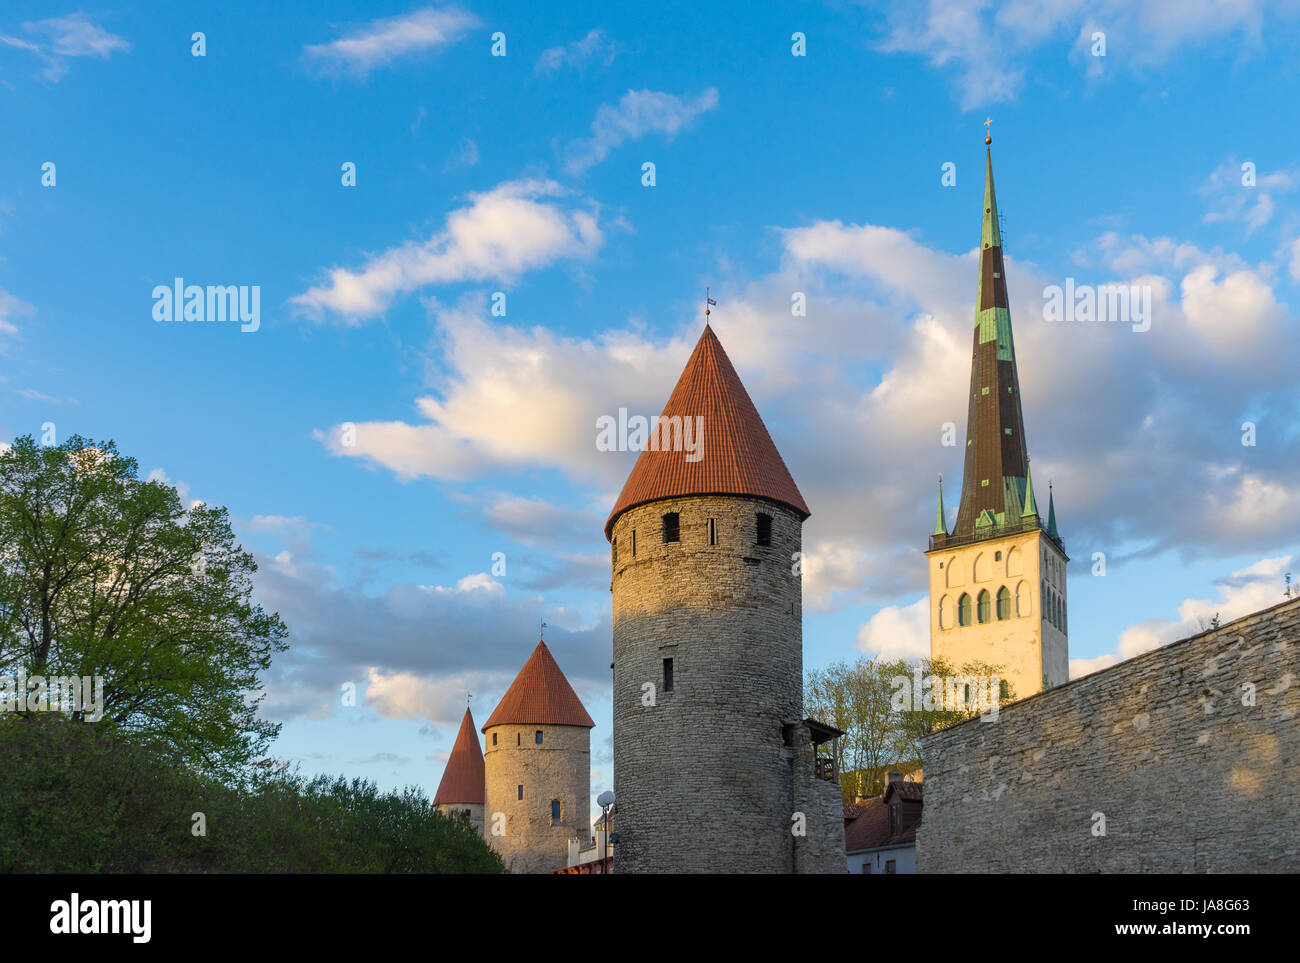 Fortress towers and St. Olaf's church against blue sky and clouds. Springtime evening in Tallinn, Estonia Stock Photo